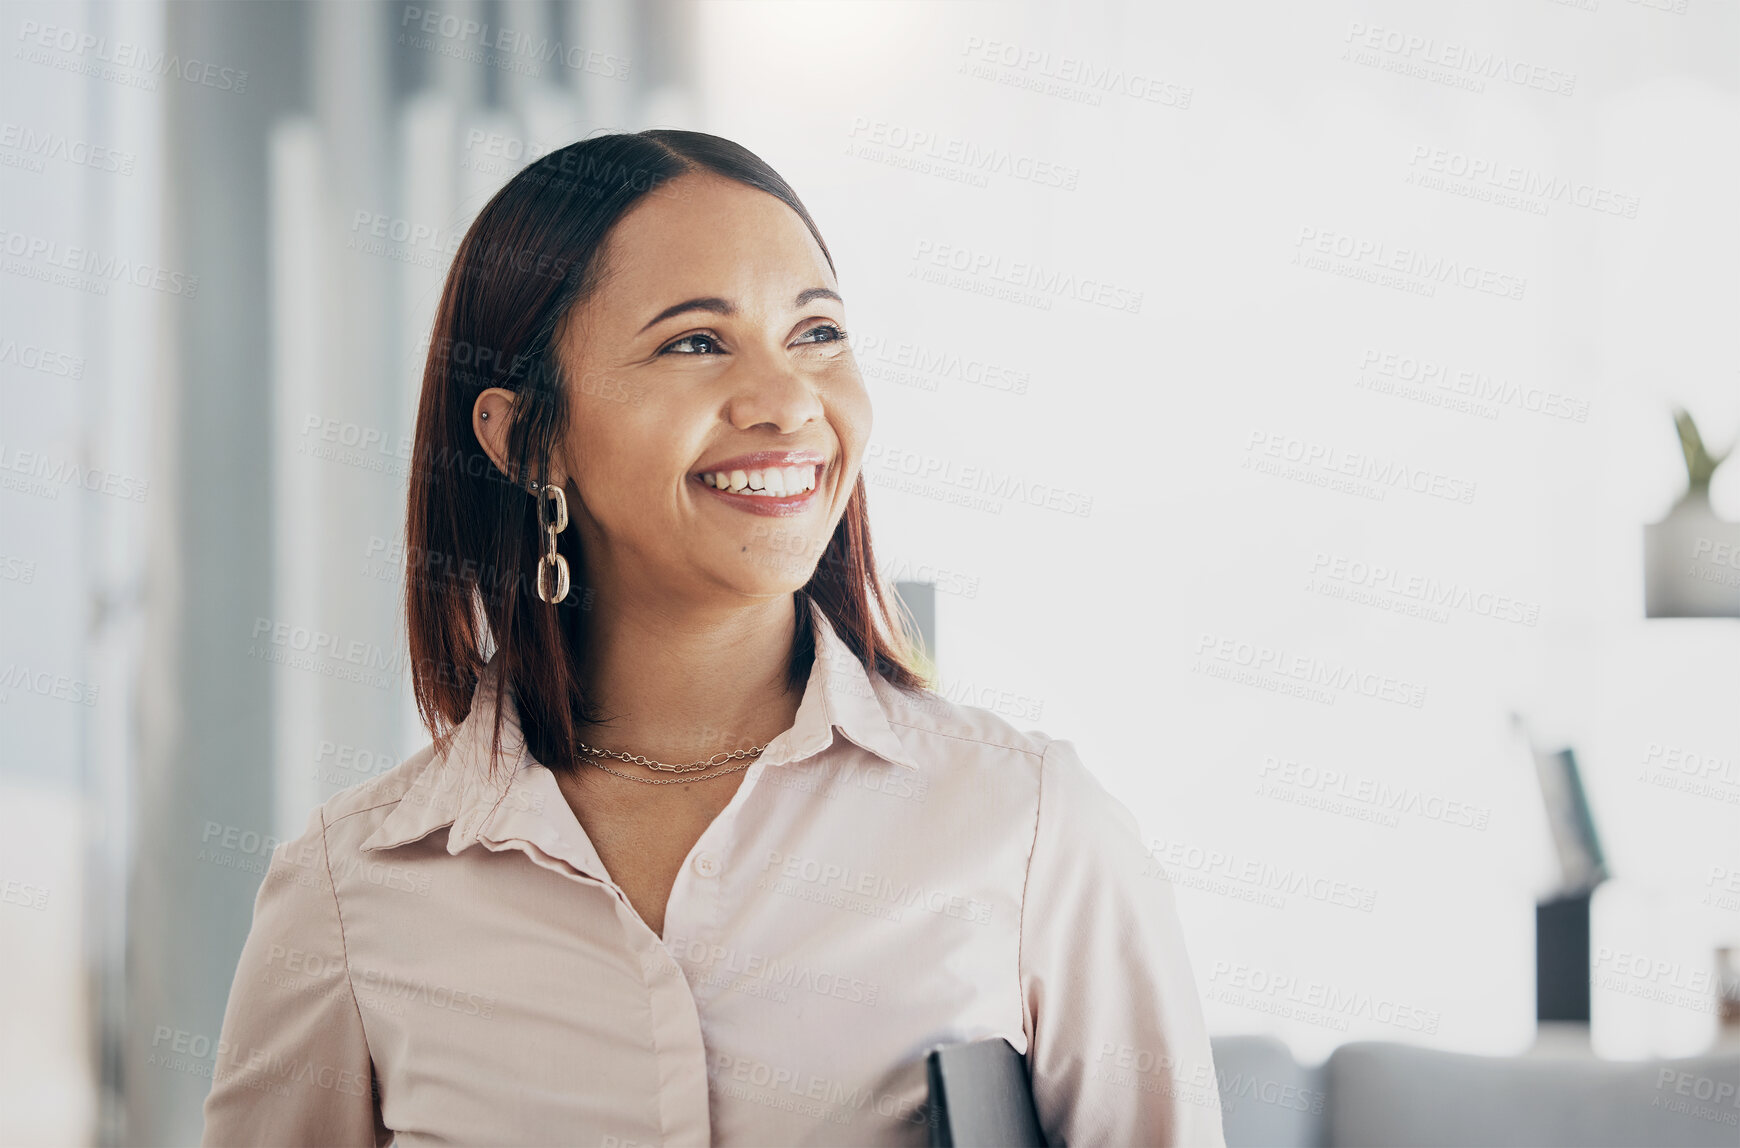 Buy stock photo Smile, happy and businesswoman in the office with confident, good and positive attitude. Happiness, ambition and professional female lawyer or attorney from Colombia standing in modern workplace.